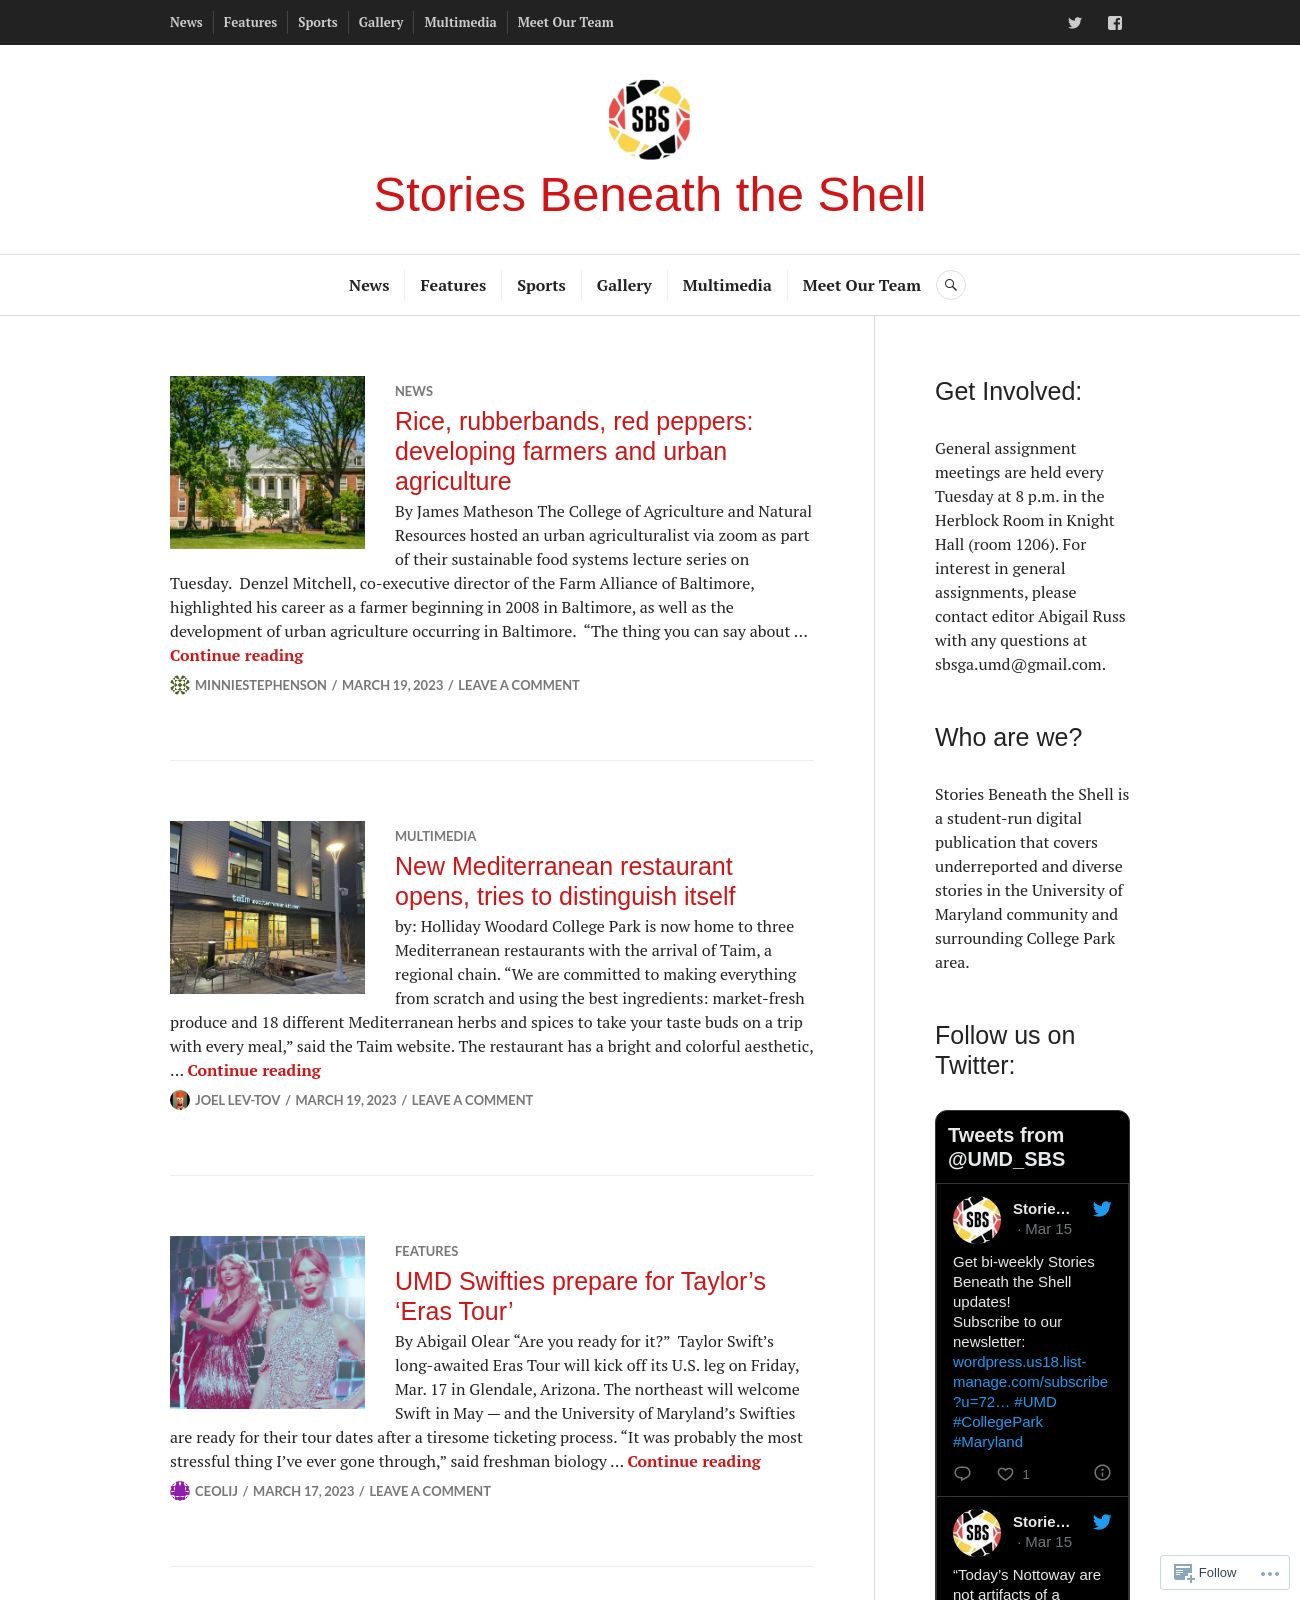 Stories Beneath the Shell at 2023-03-22 08:32:07-04:00 local time